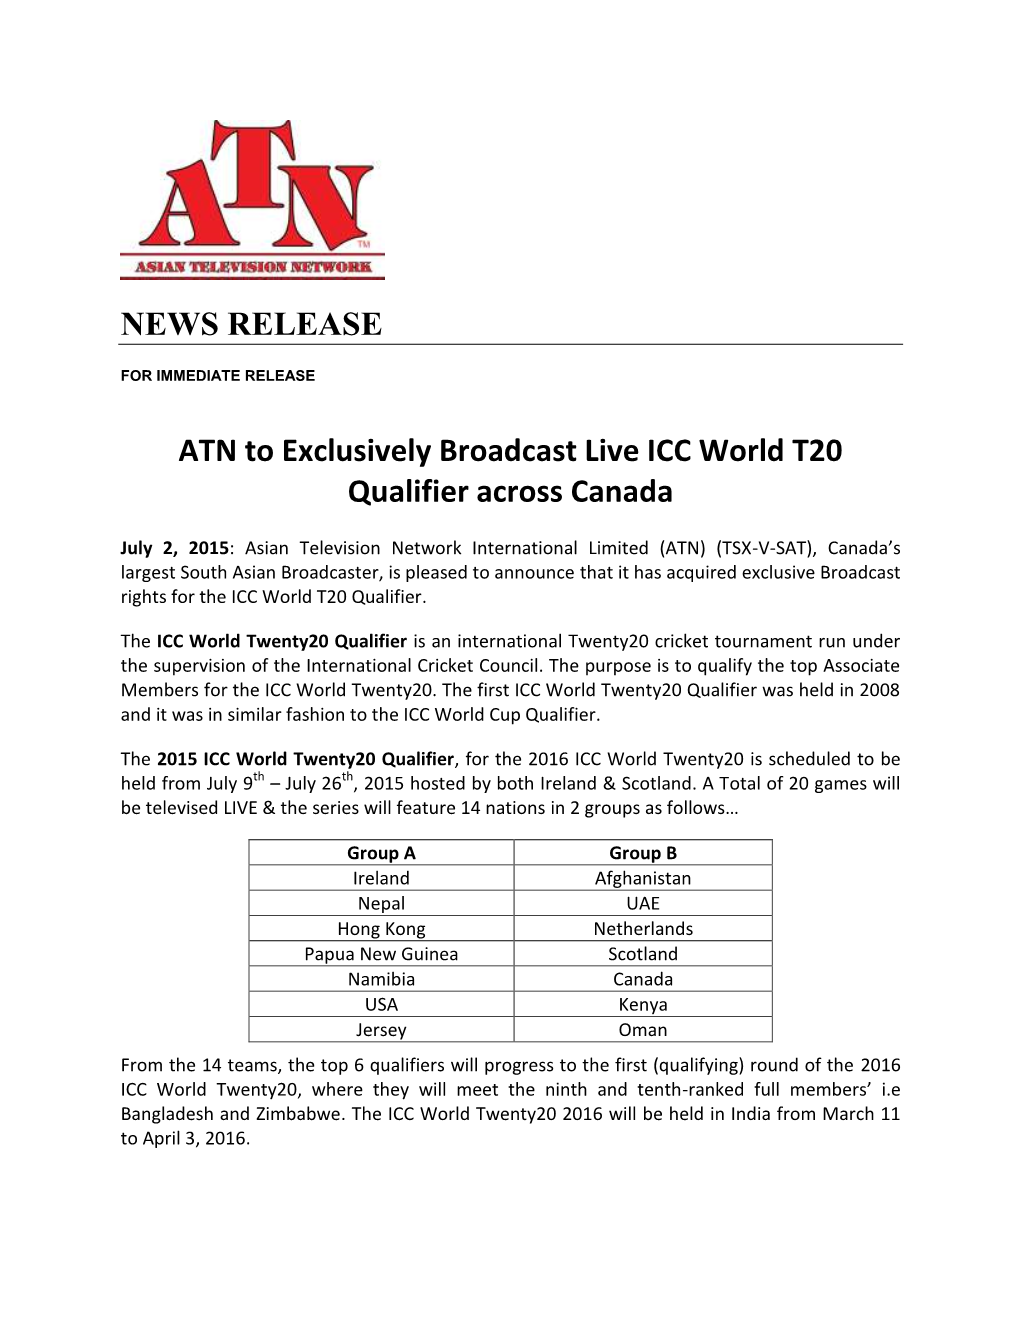 NEWS RELEASE ATN to Exclusively Broadcast Live ICC World T20